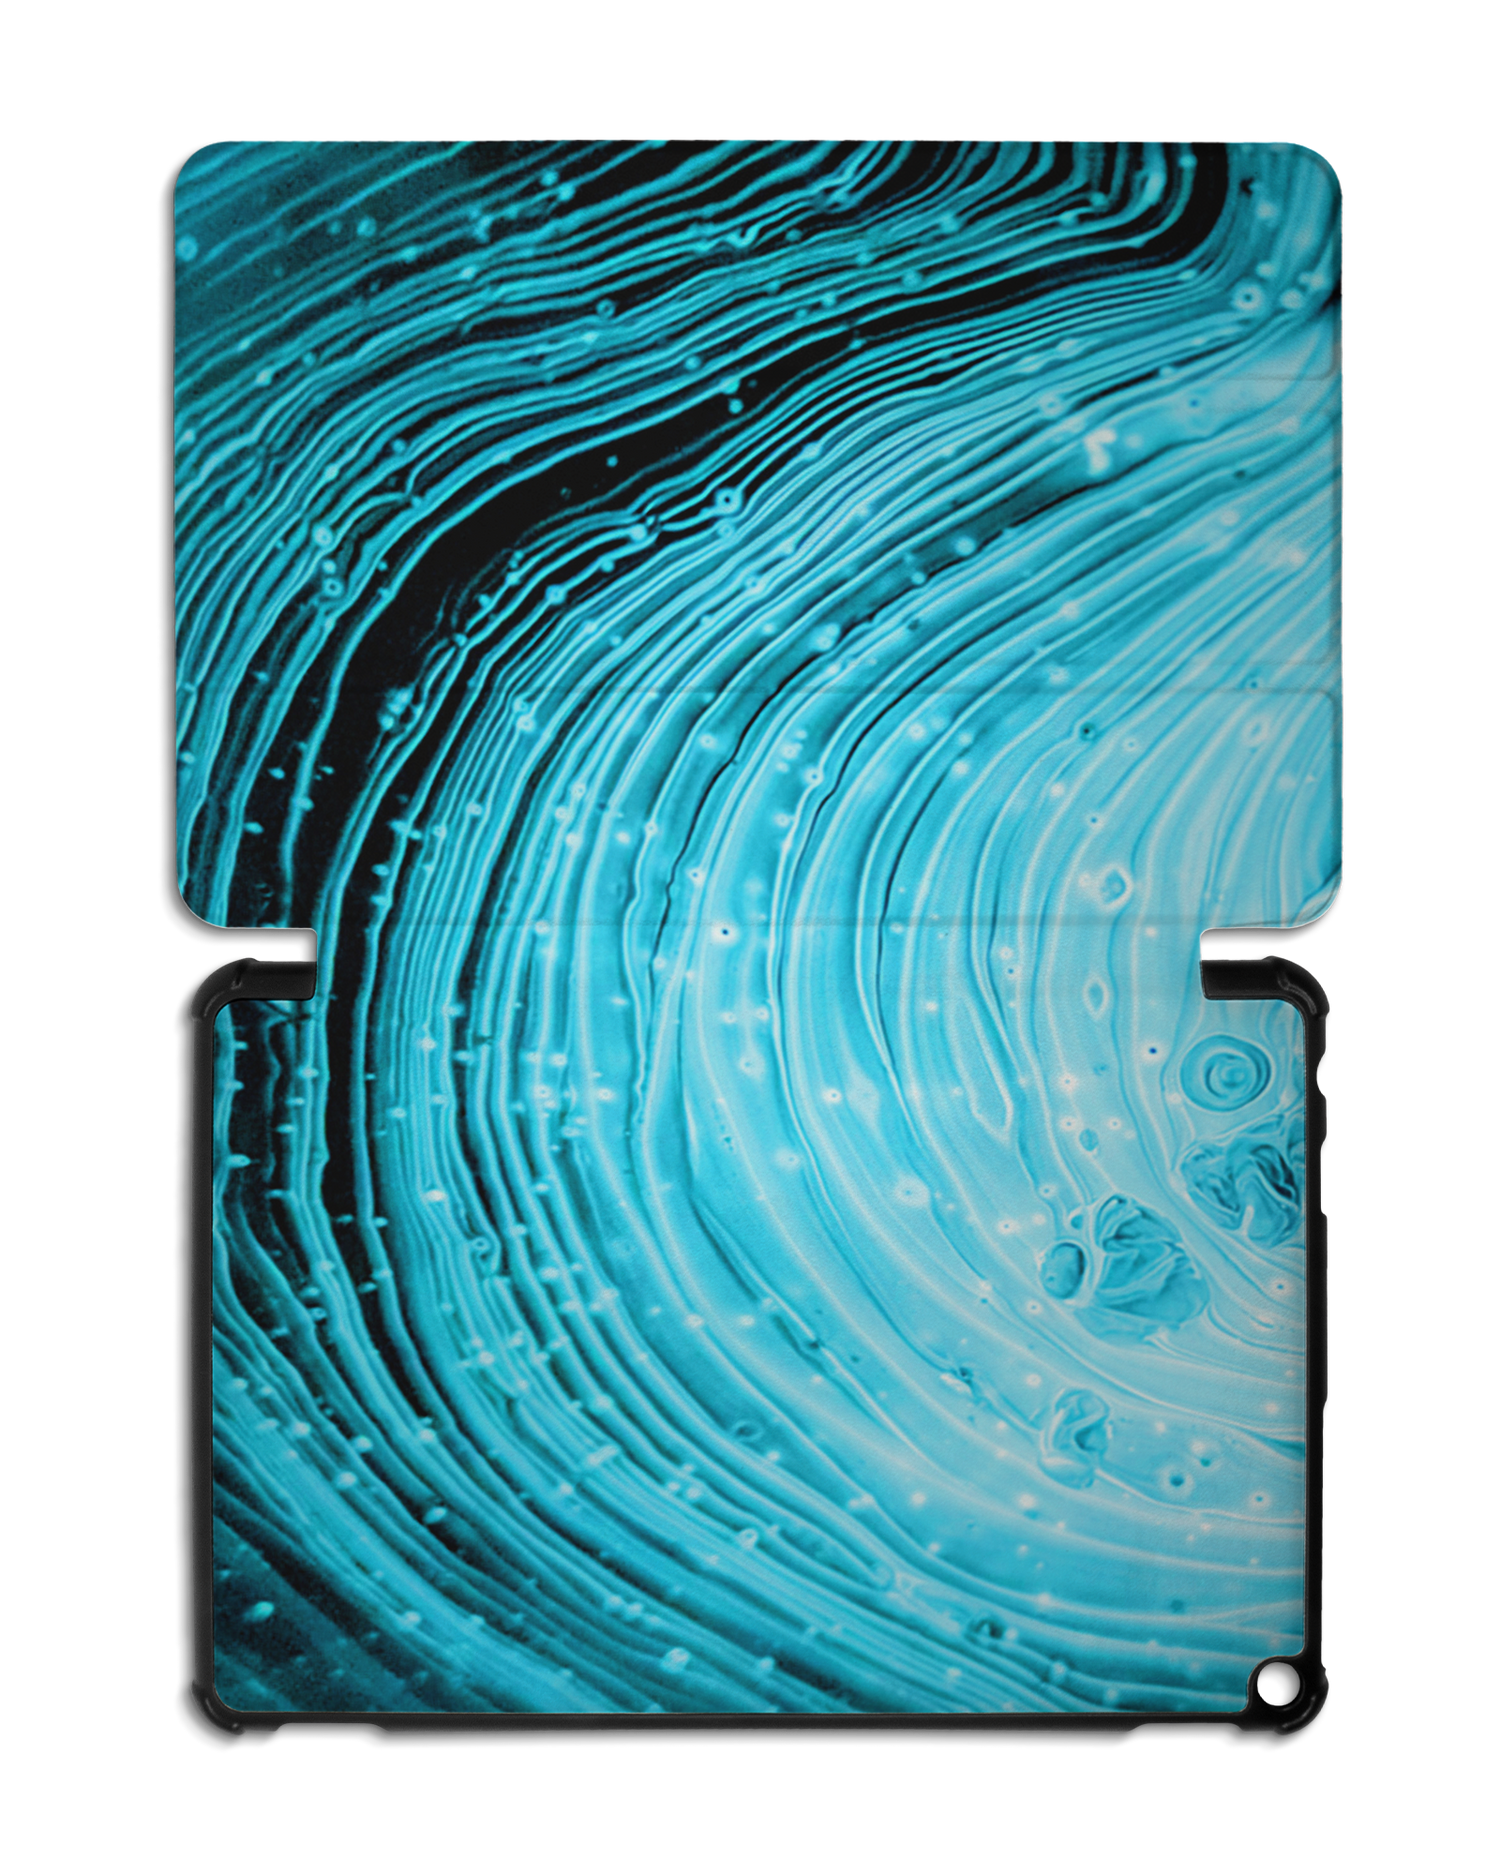 Turquoise Ripples Tablet Smart Case for Amazon Fire HD 10 (2021): Opened